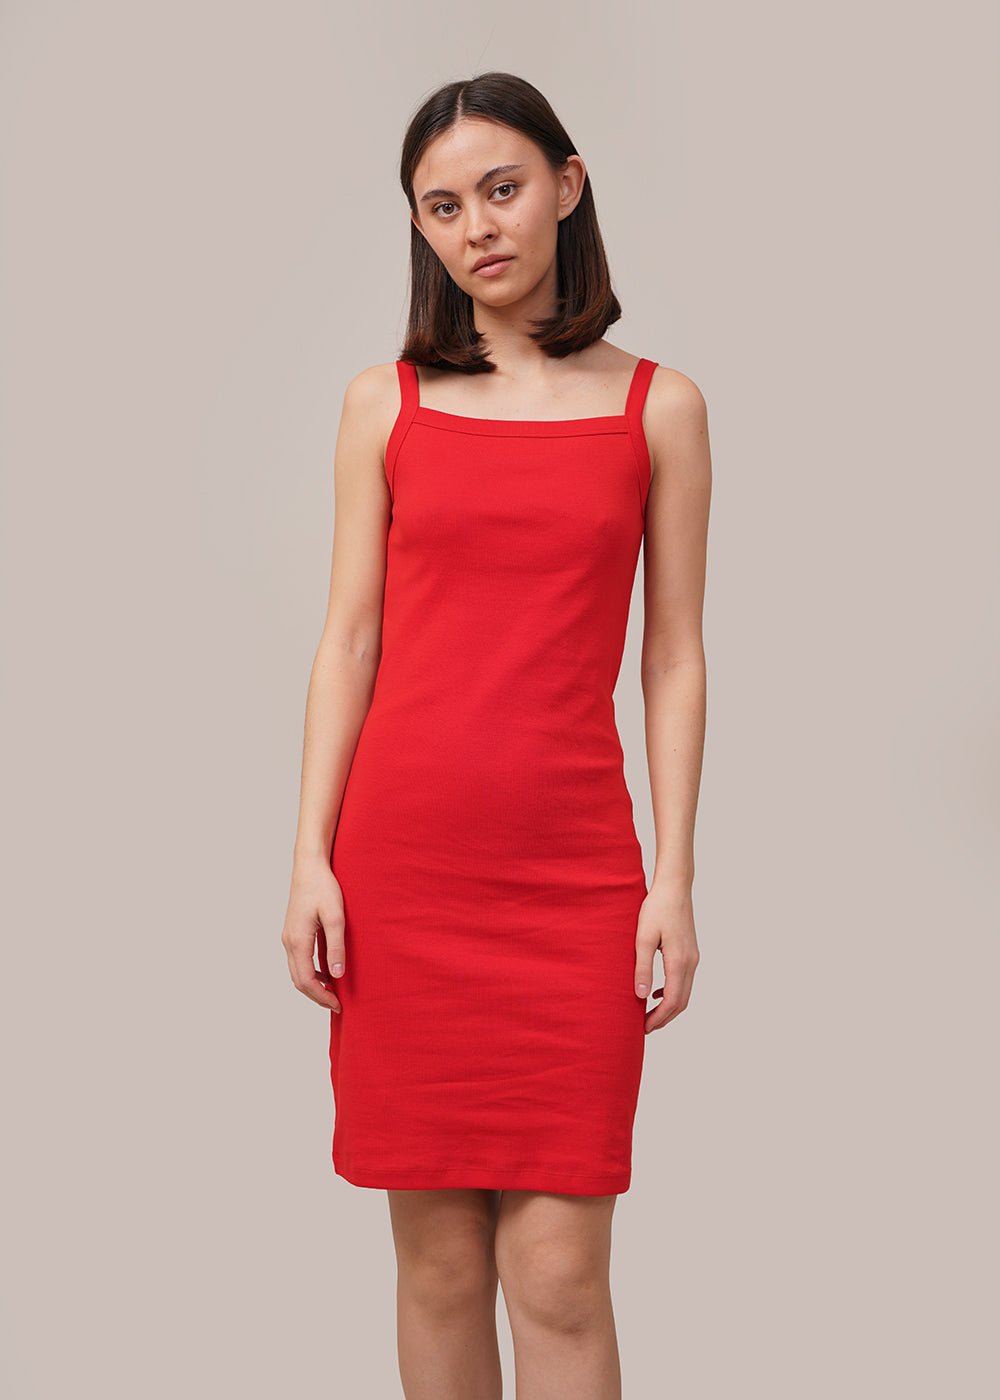 FLORE FLORE Audrey May Dress - New Classics Studios Sustainable Ethical Fashion Canada